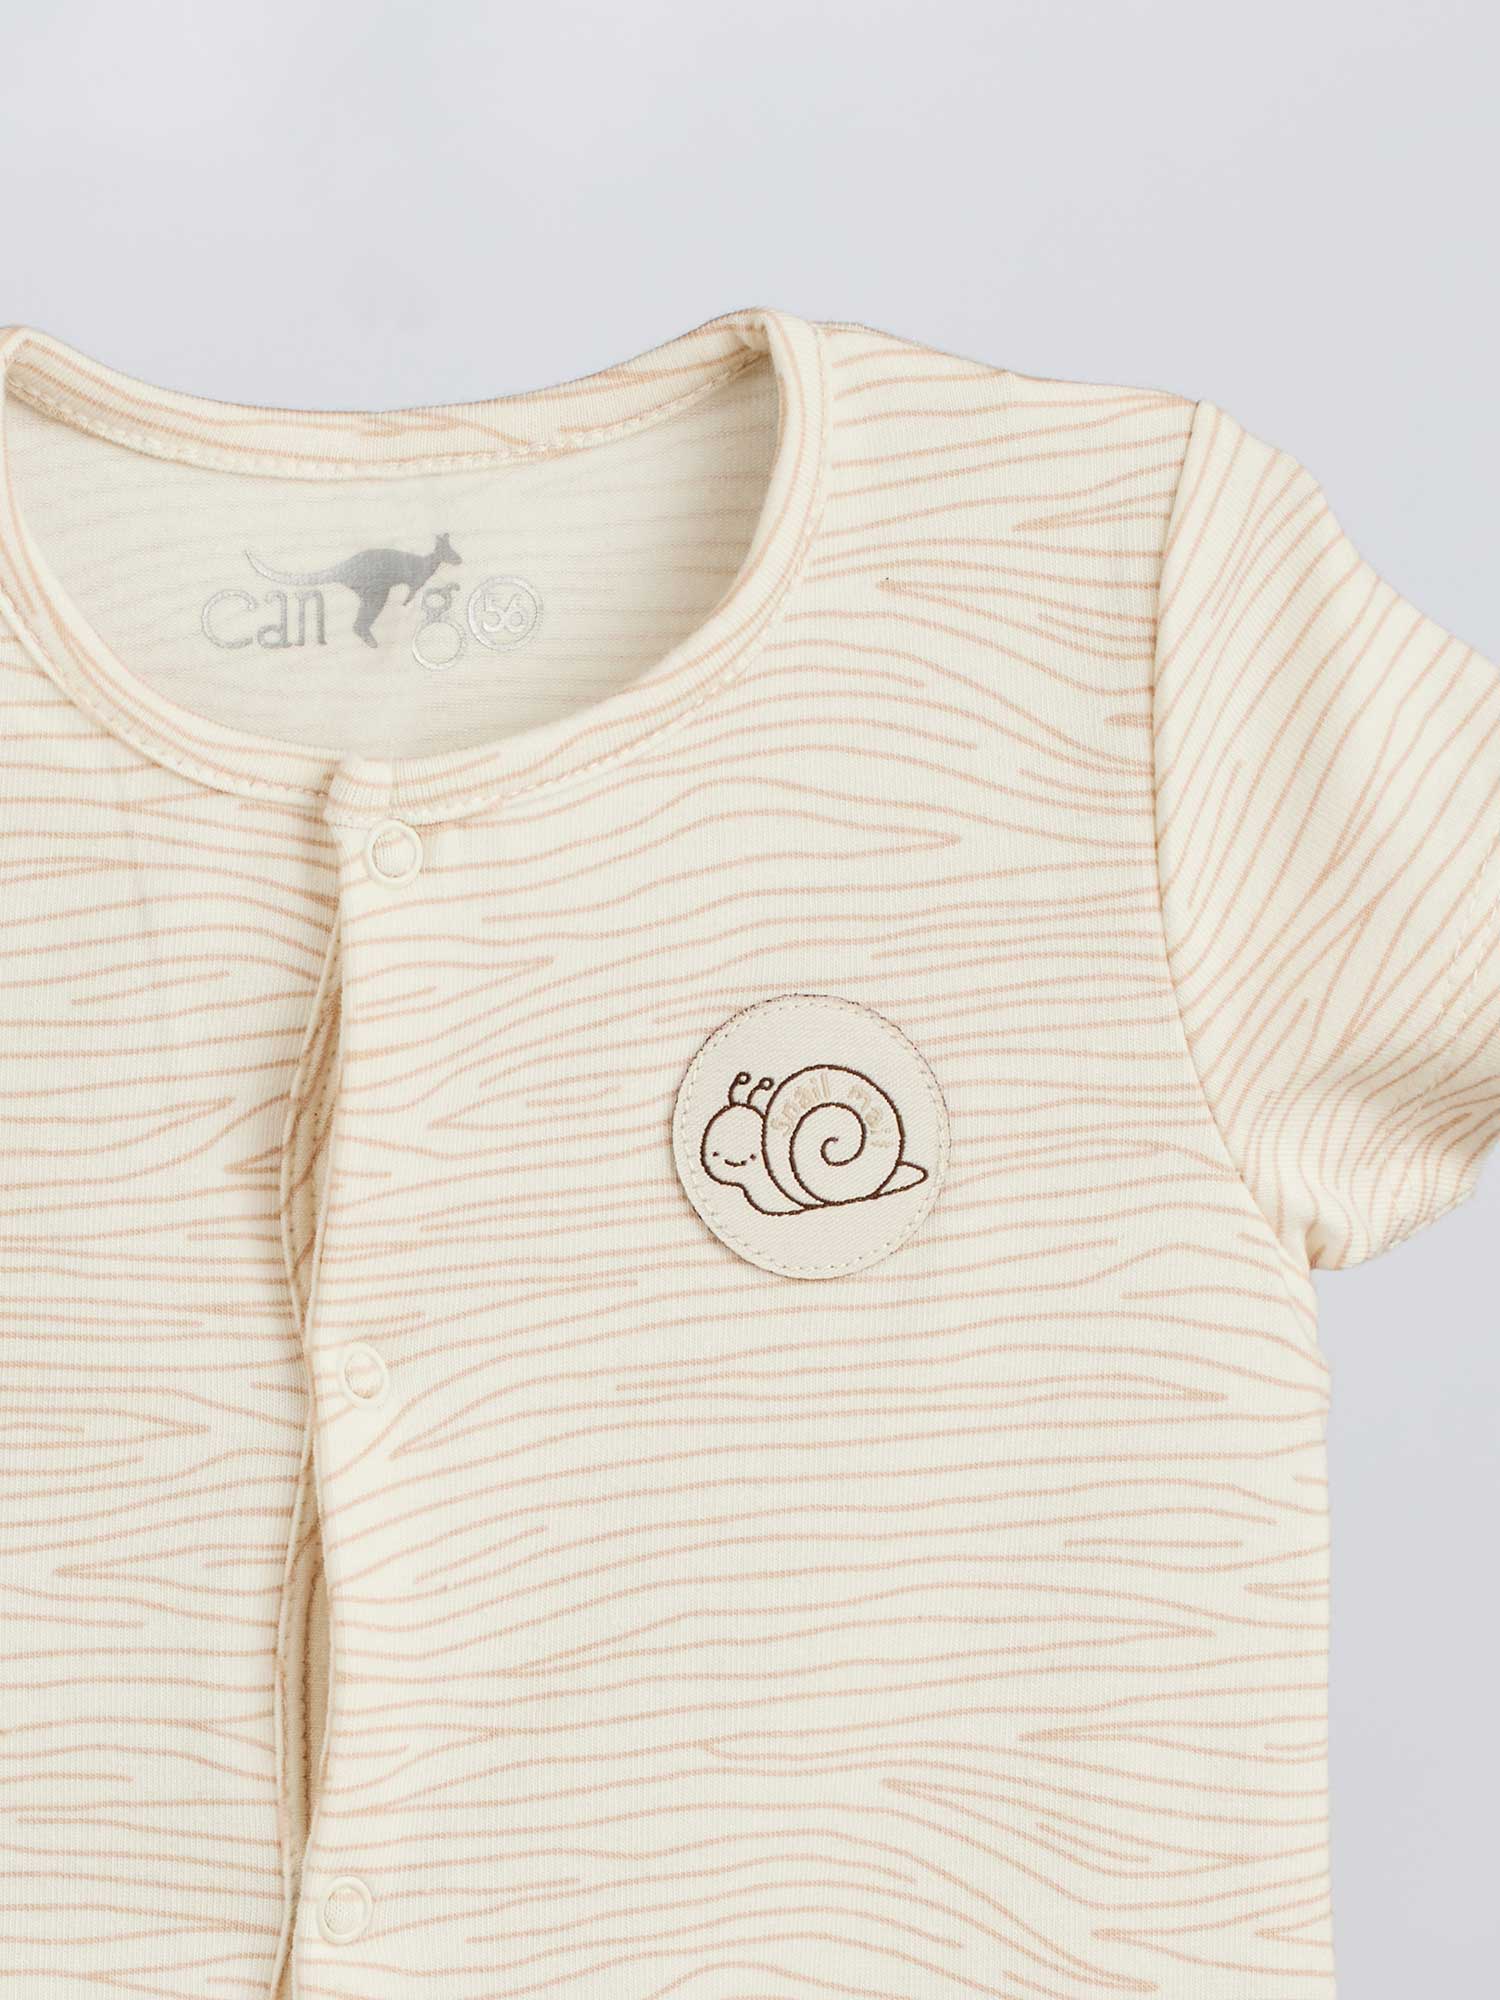 The infant overall has a cute snail logo print and warm colors